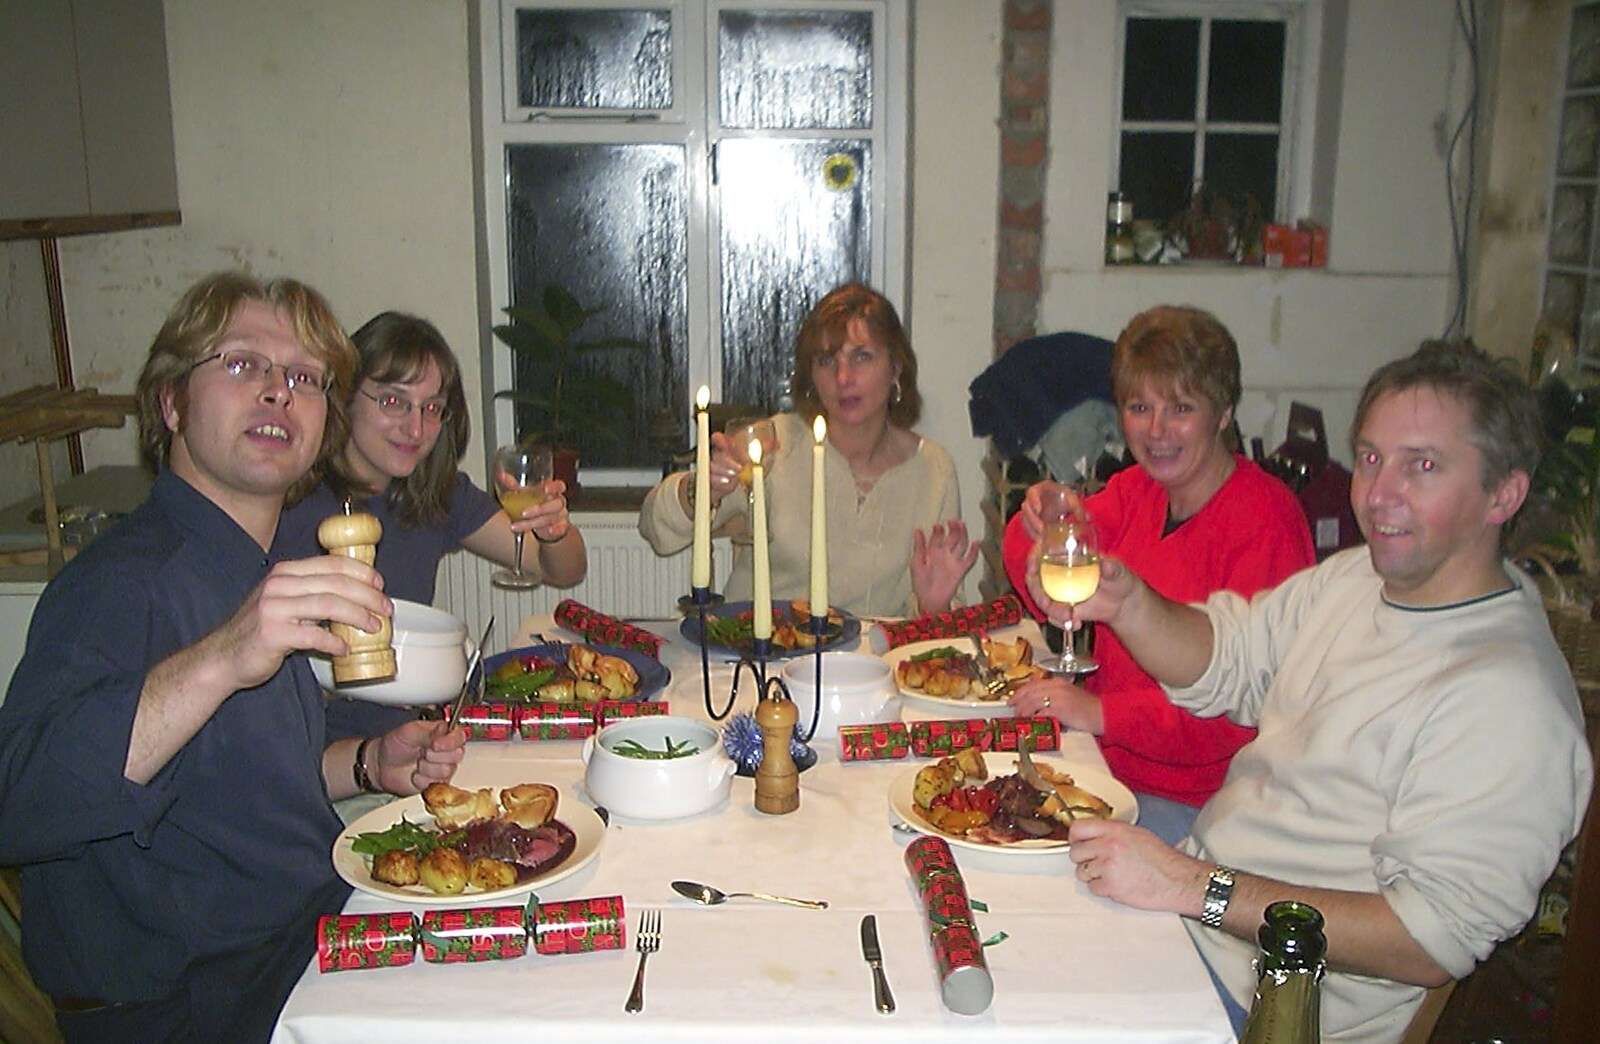 It's Christmas lunch from Christmas Day at Nosher's, Brome, Suffolk - 25th December 2002